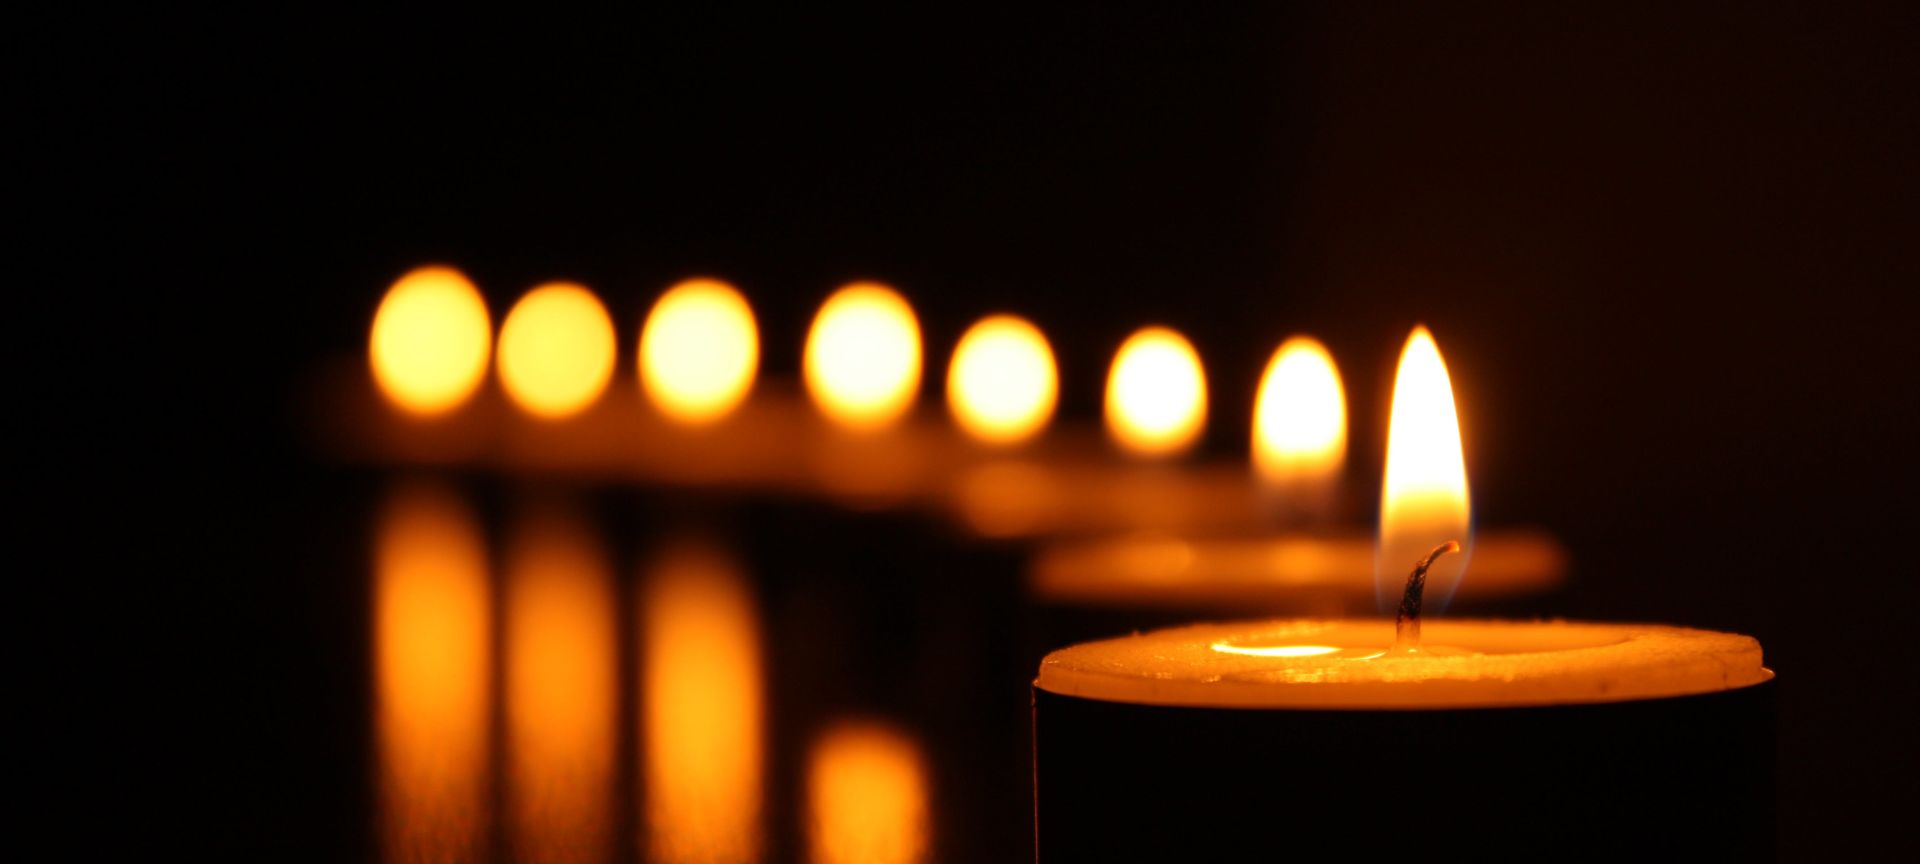 A Group Of Lit Candles